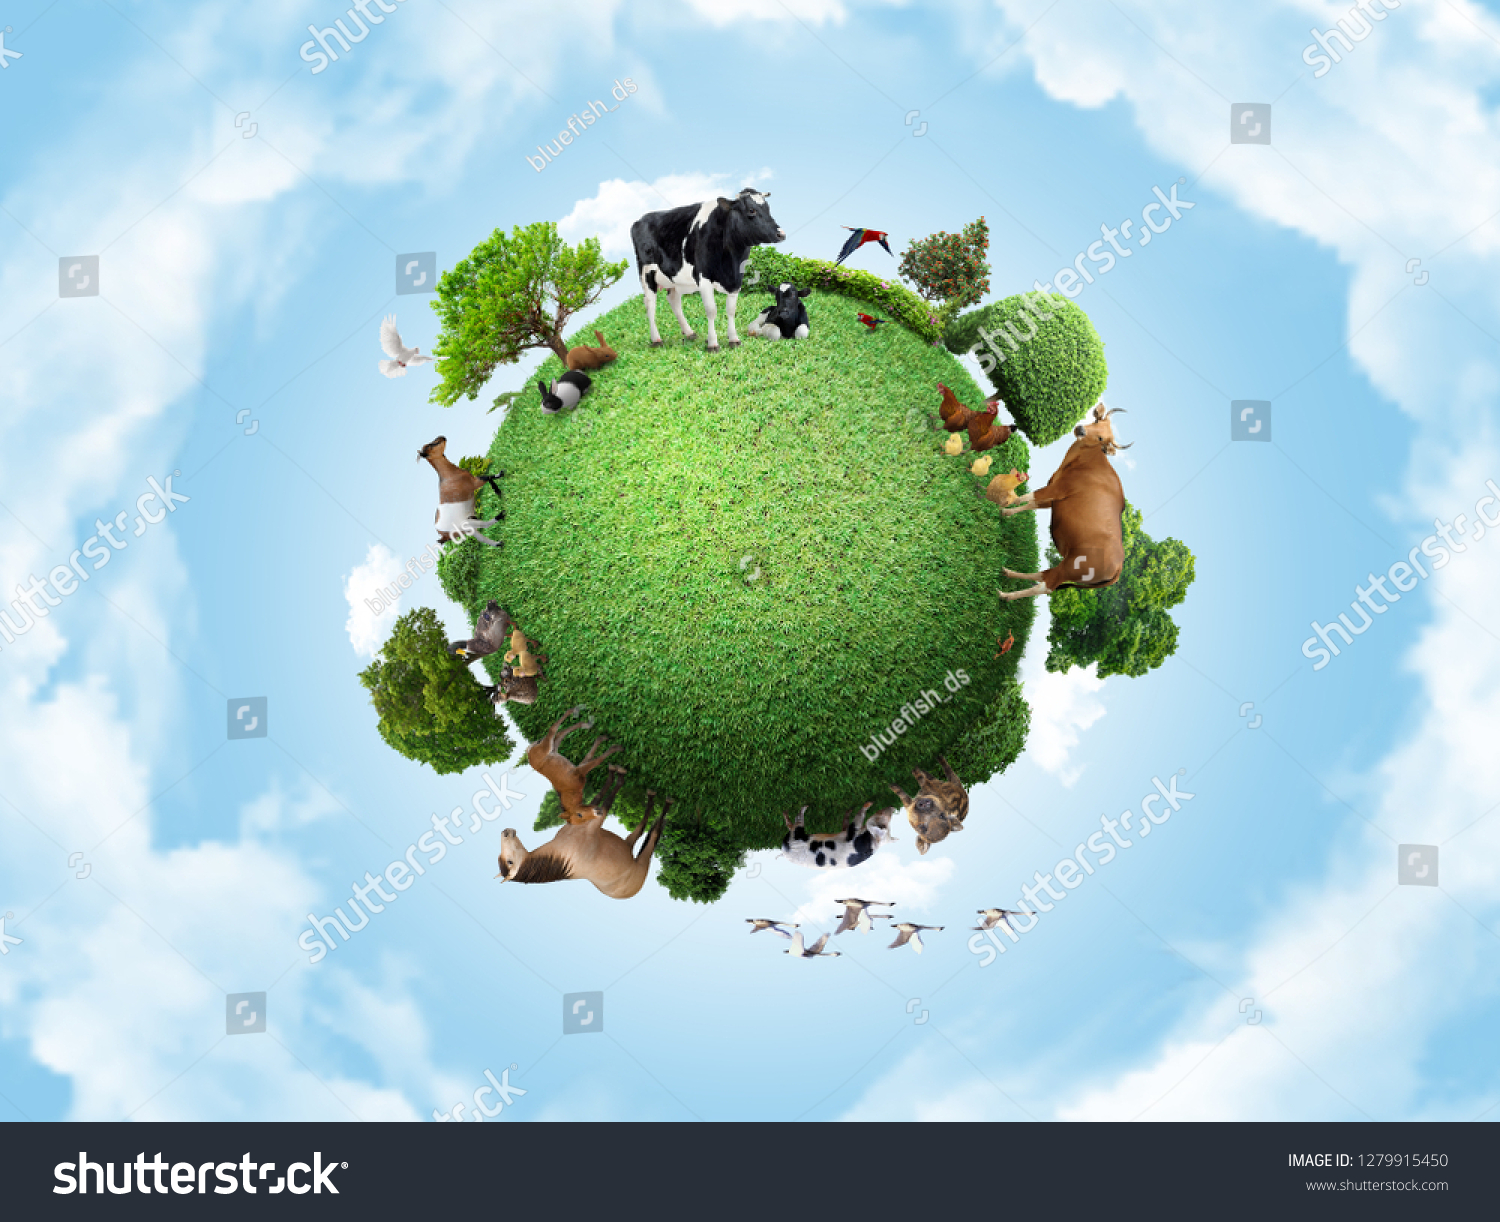 Green peace earth, miniature planet, globe concept showing a green, peaceful and animals poultry life  #1279915450